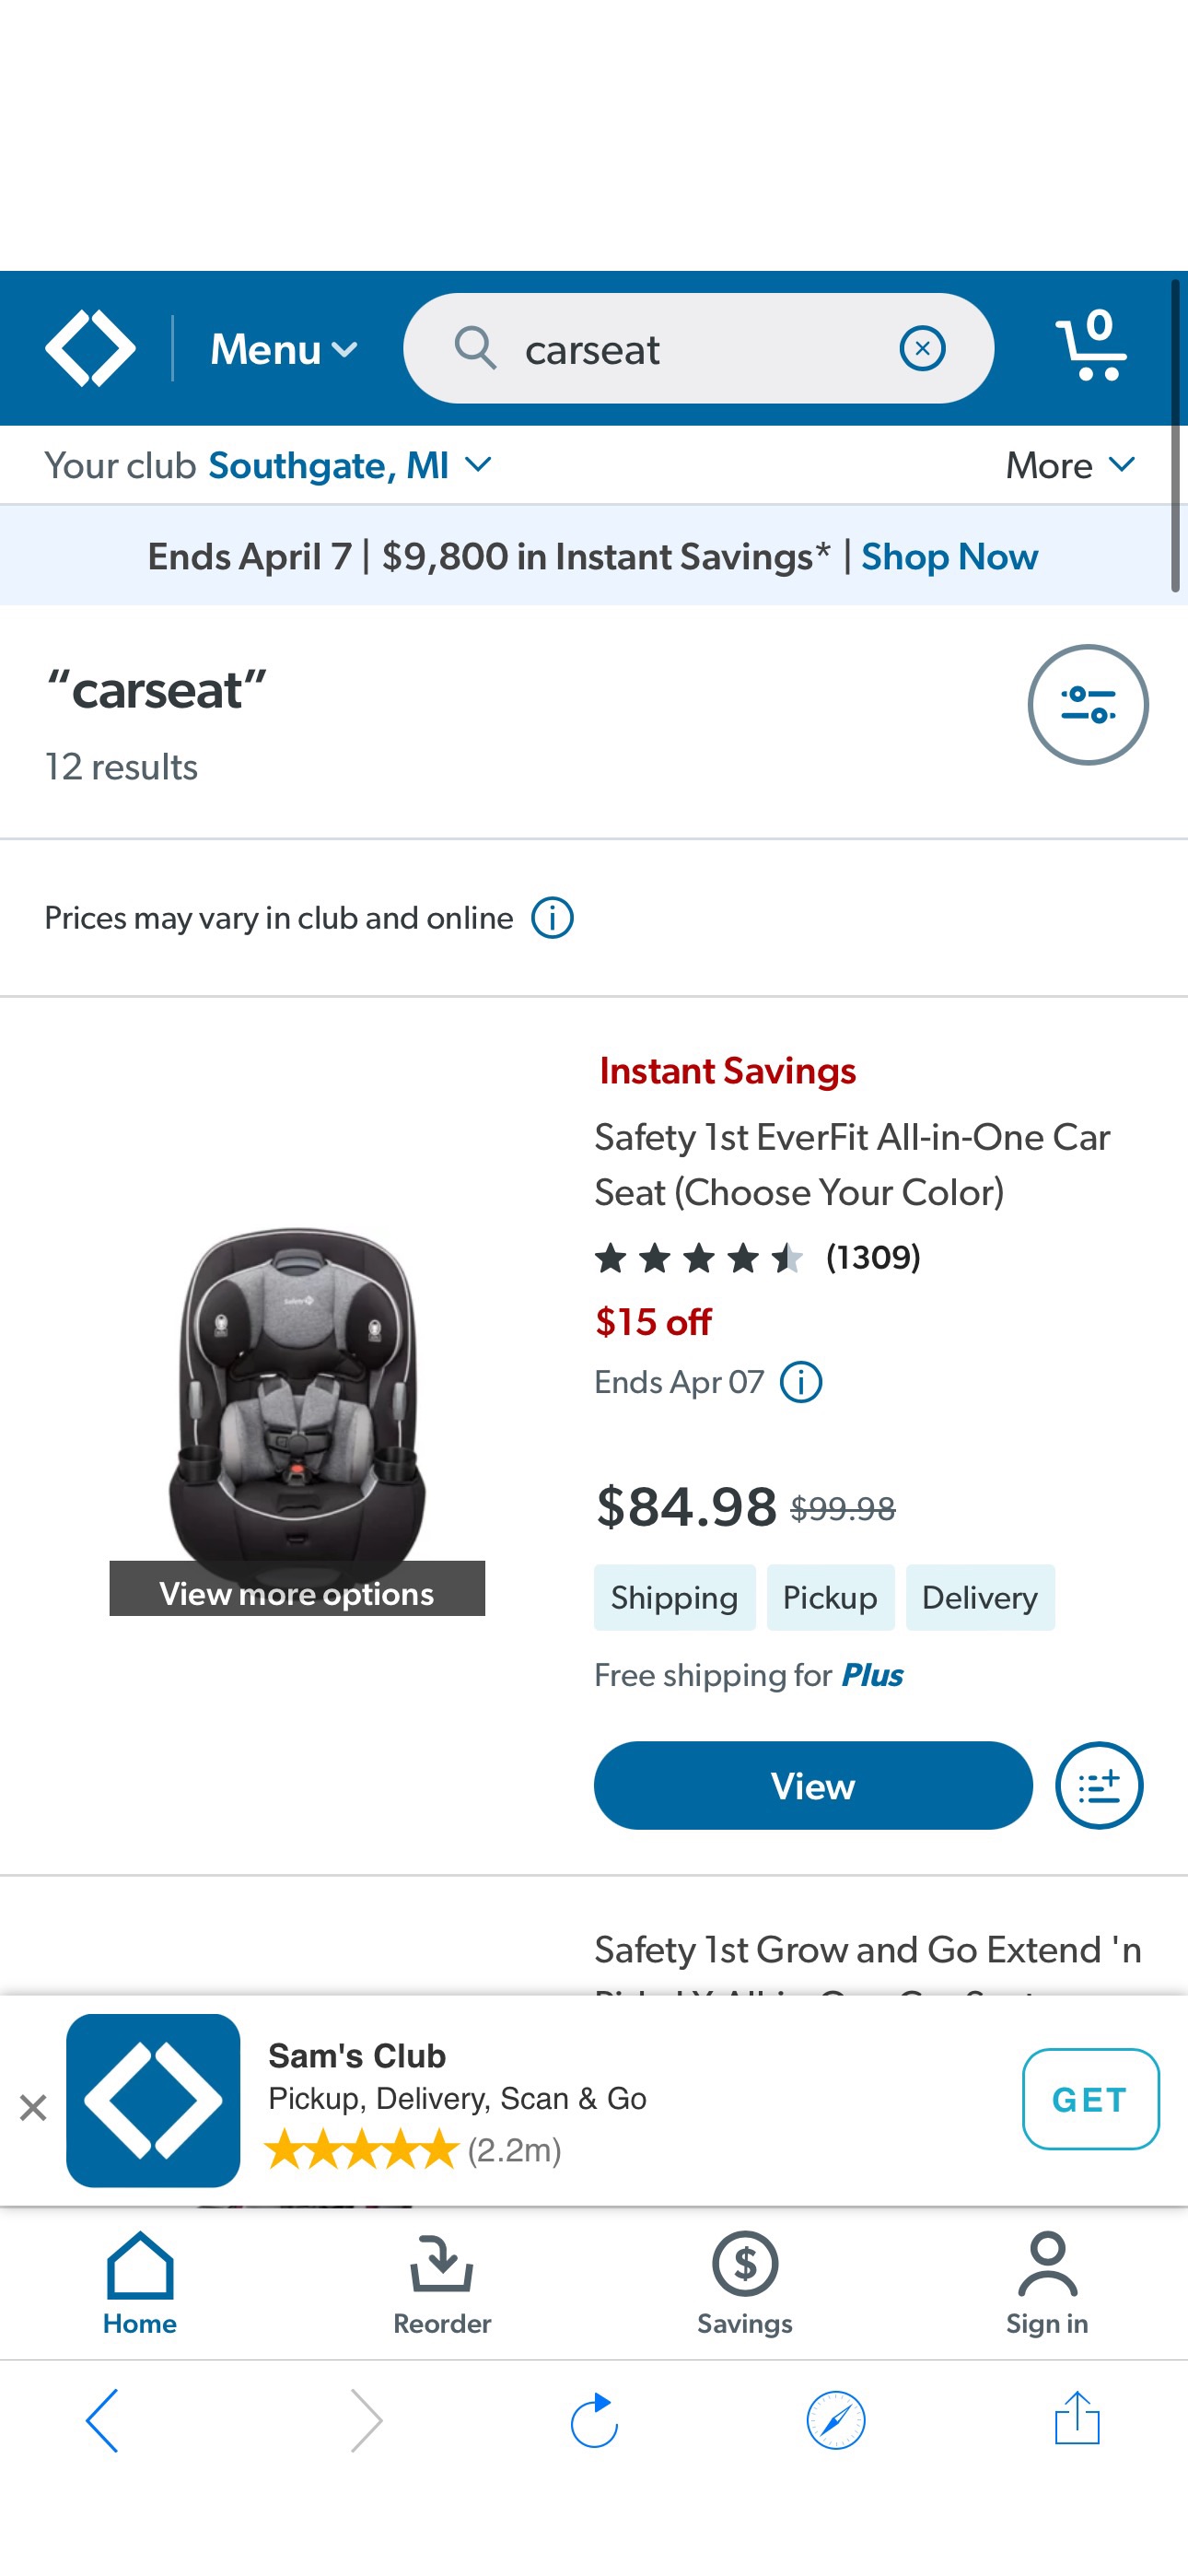 Search for carseat - Sam's Club